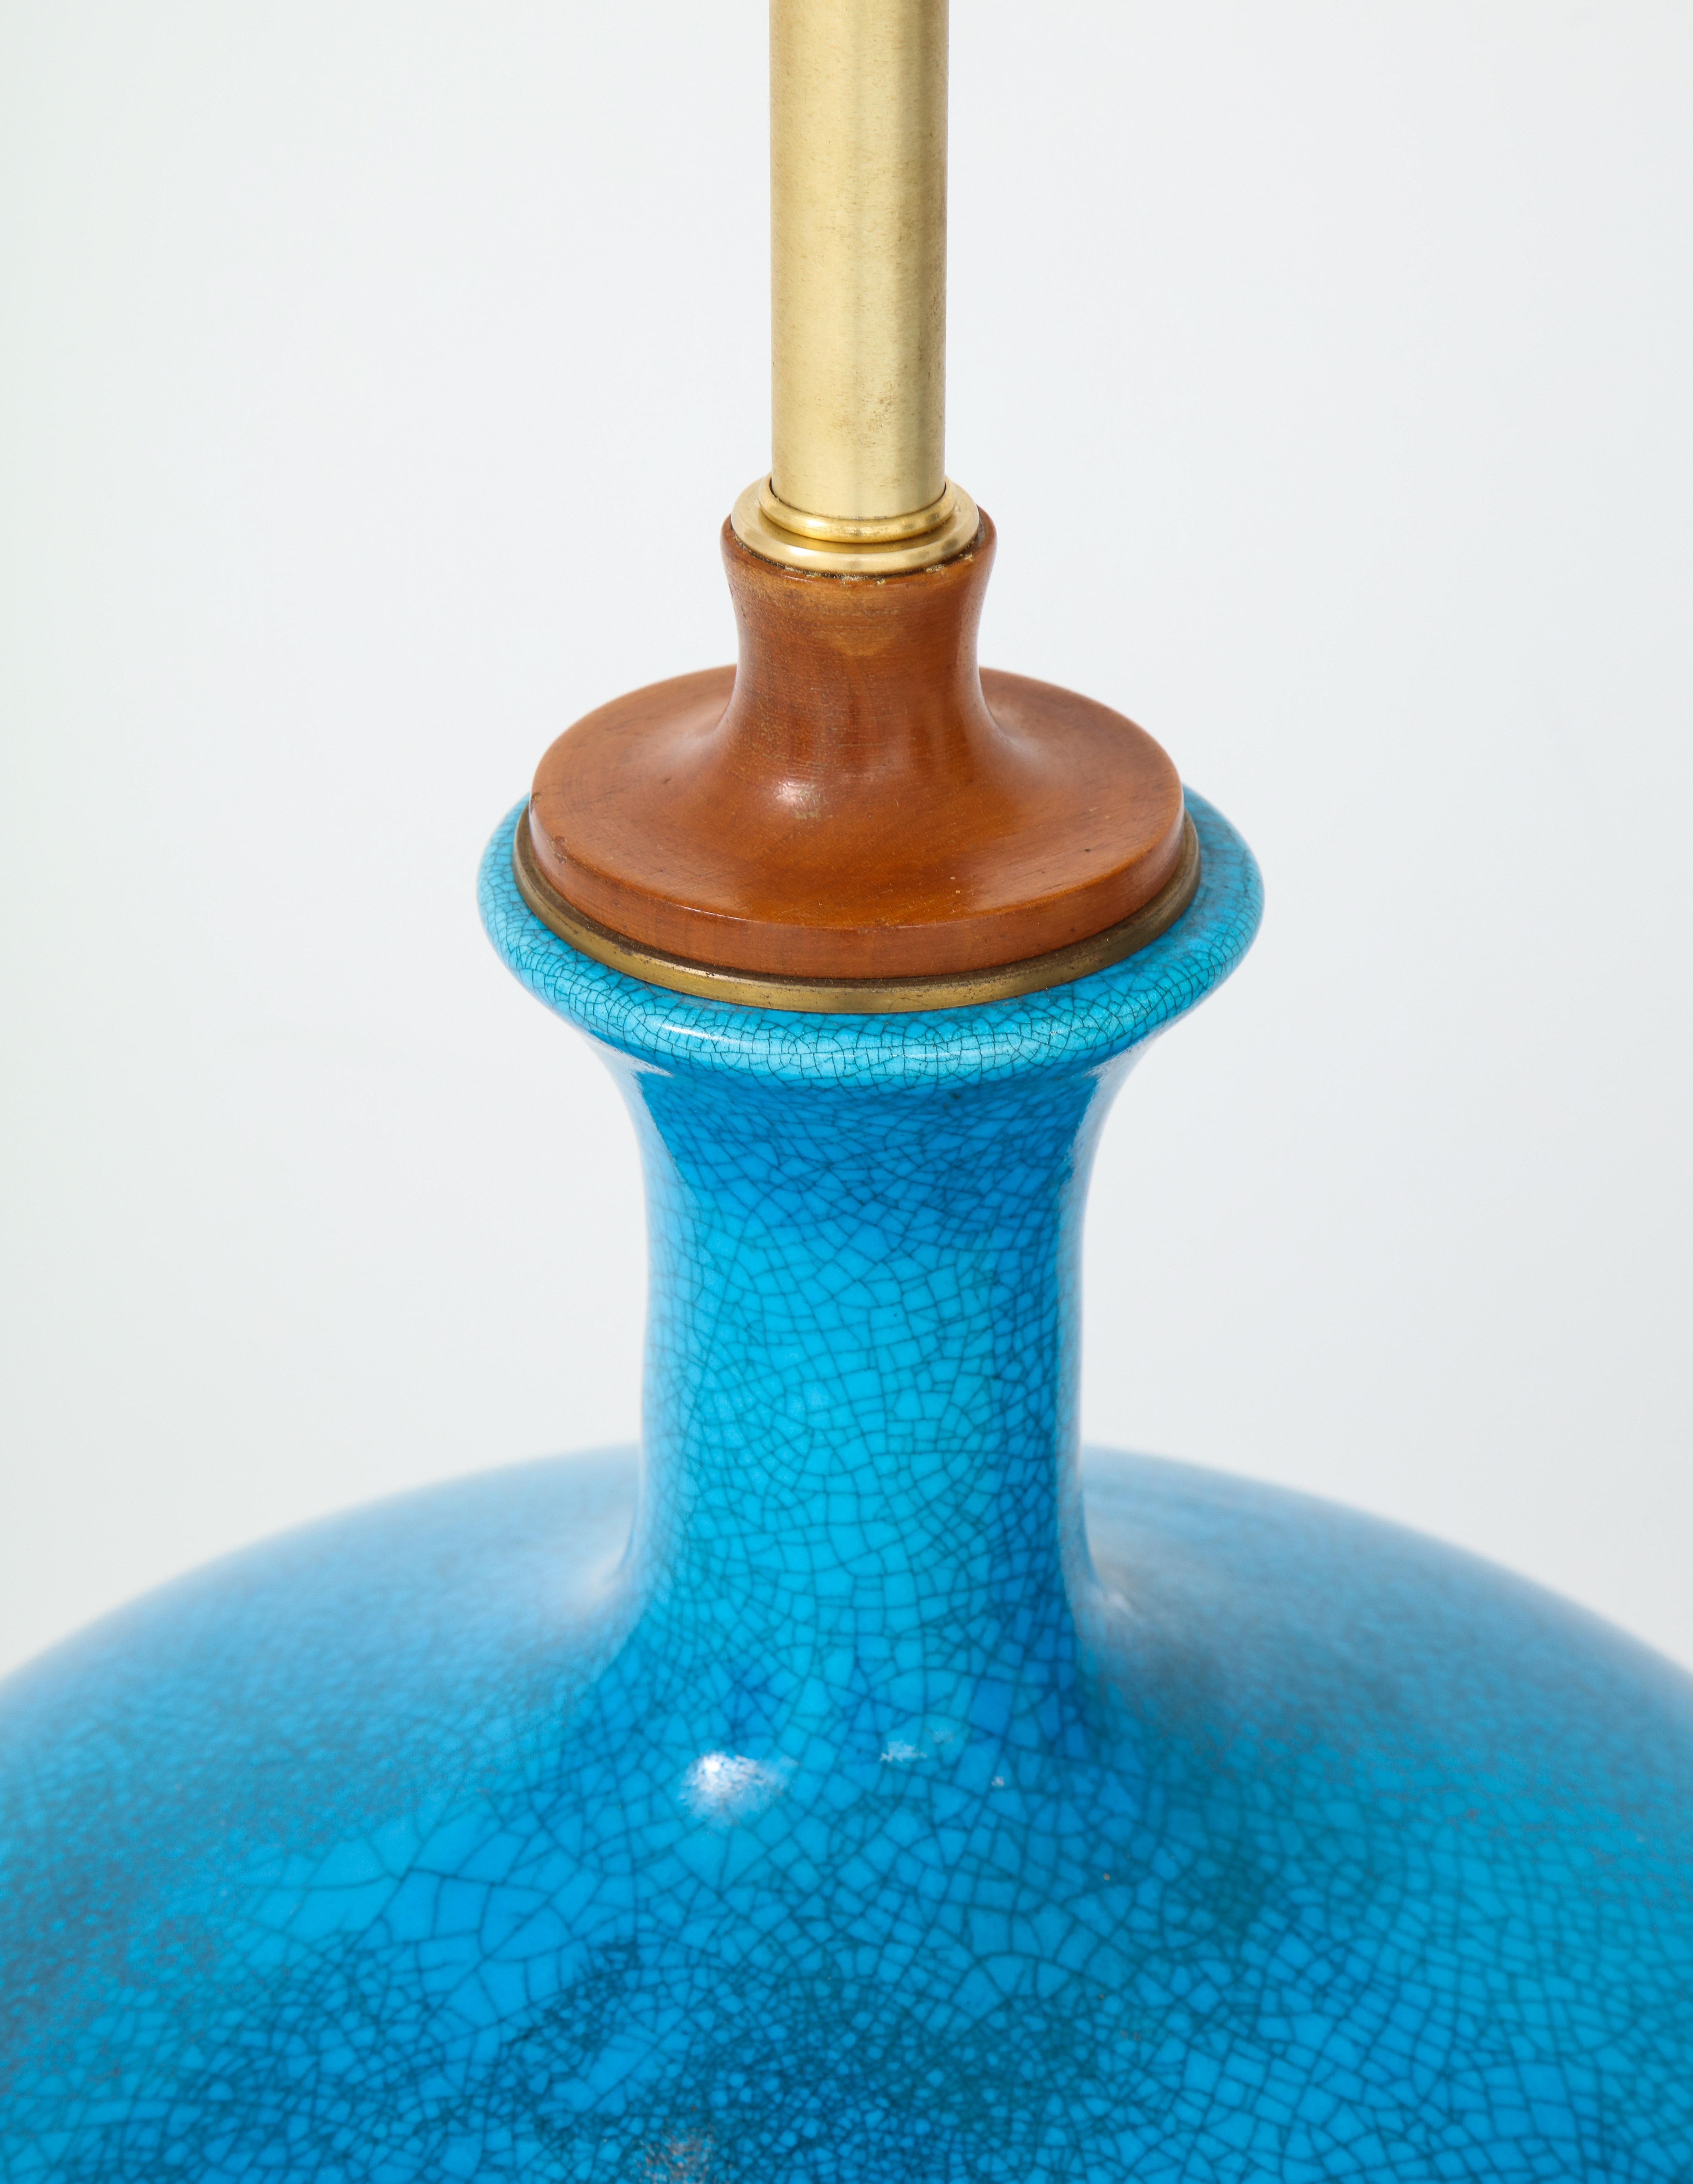 Fabulous Pair of Mid-Century Lamps with a Cerulean Blue Glazed Finish 1